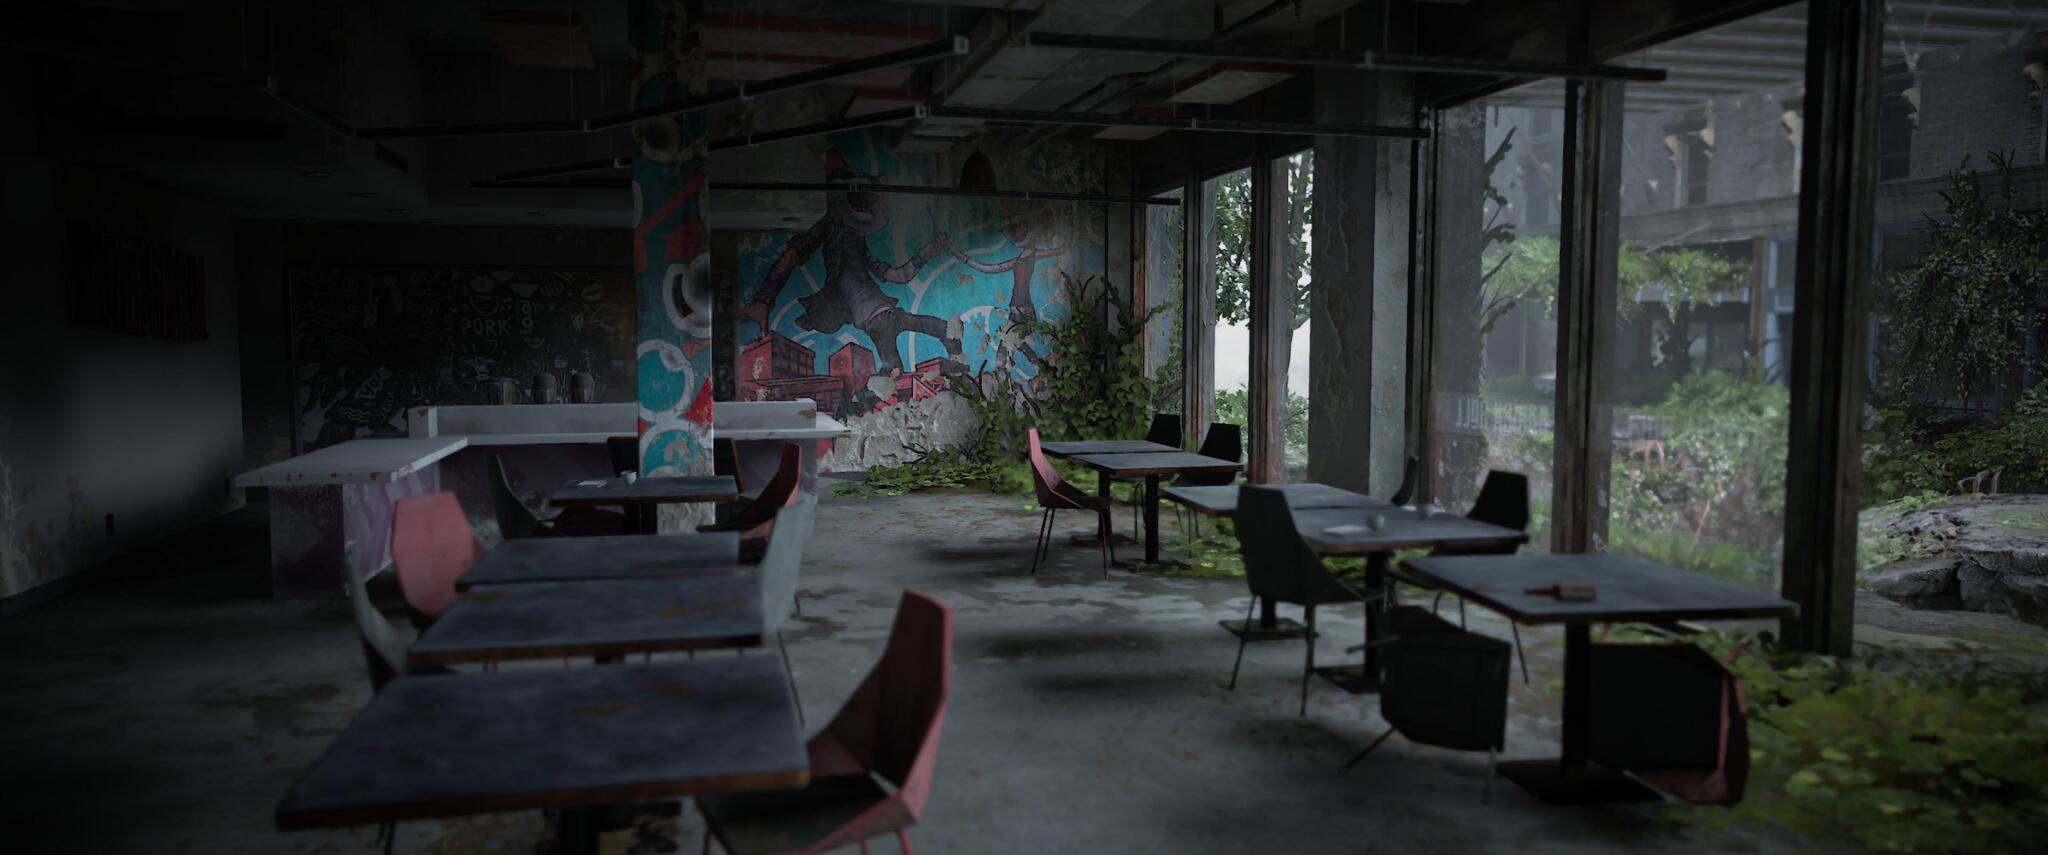 The Cat Cafe, in "The Last of Us: Part II", captured by Marty Friedel